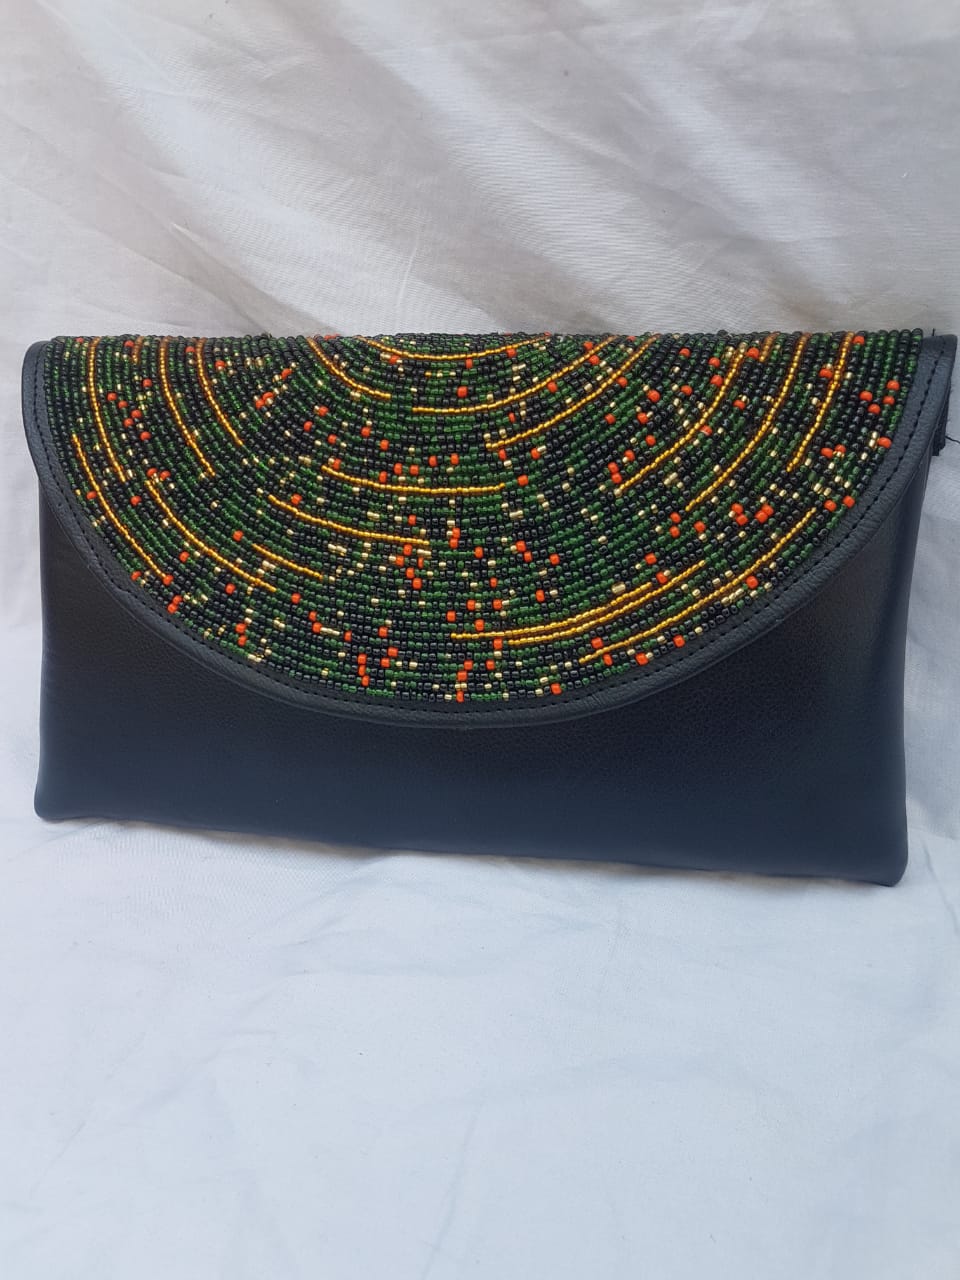 Leather clutch purse decorated with colorful beads.